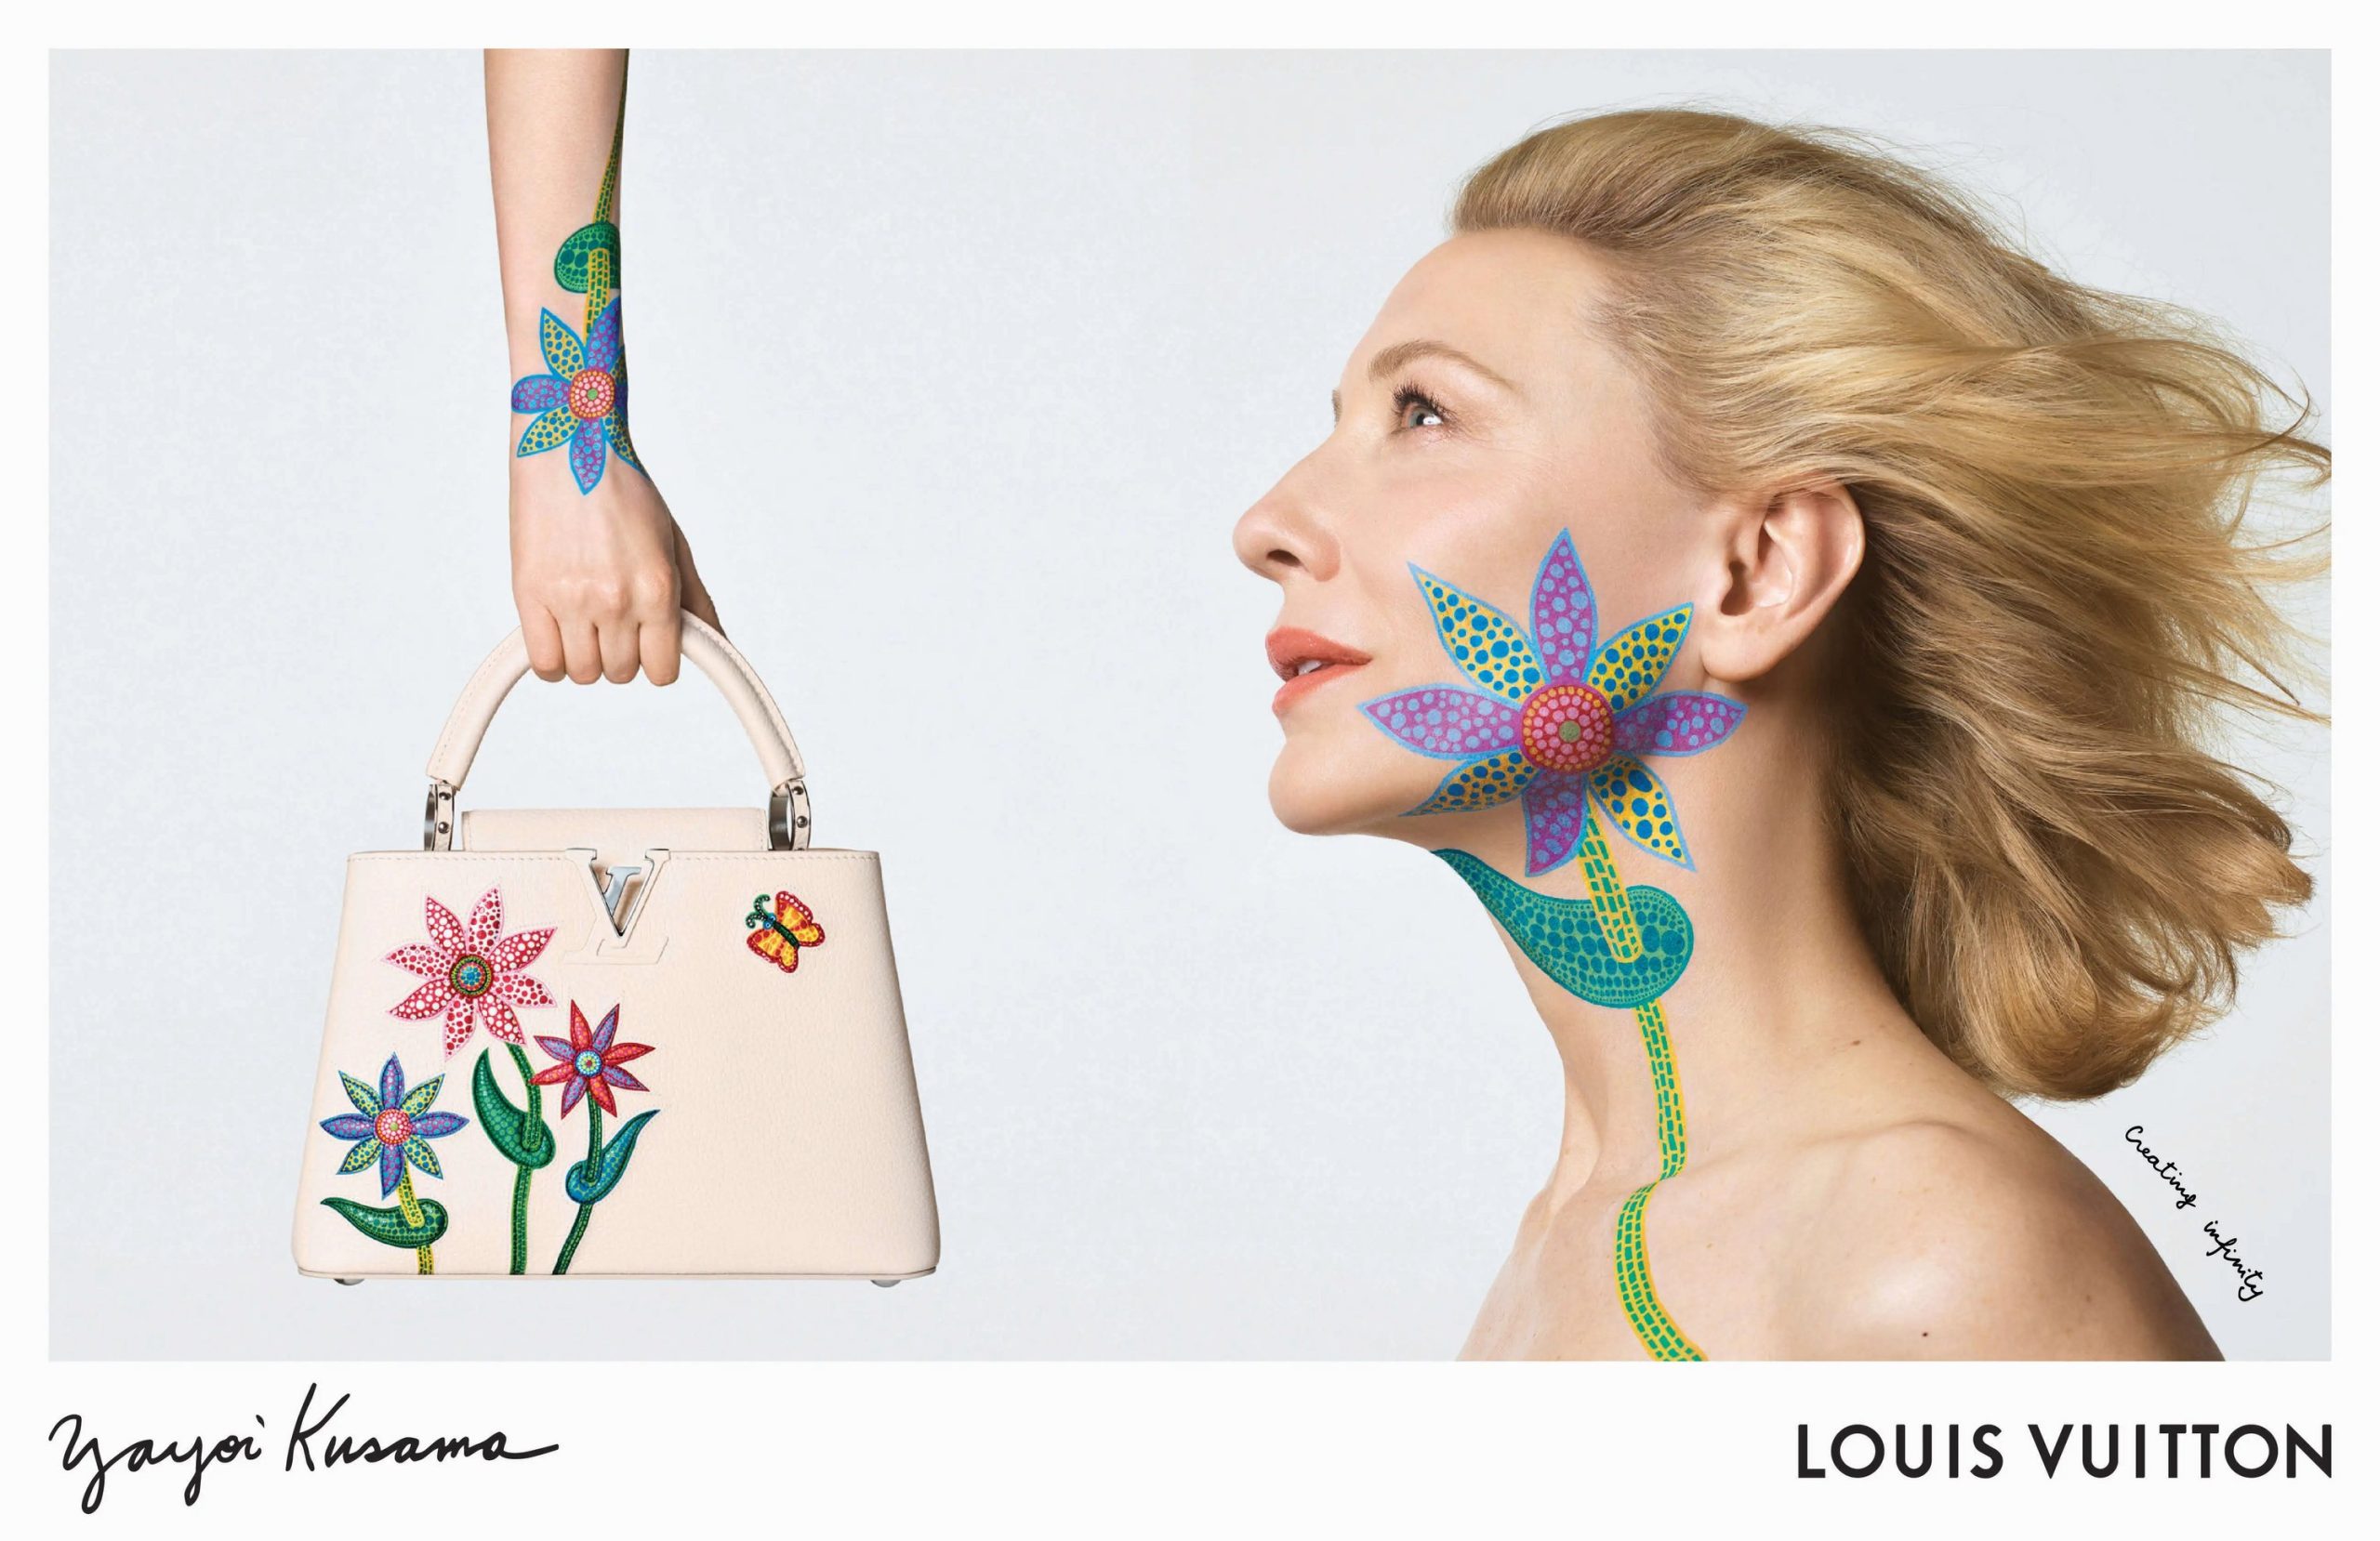 Creating Infinity: A New Fashion Book by Louis Vuitton and Yayoi